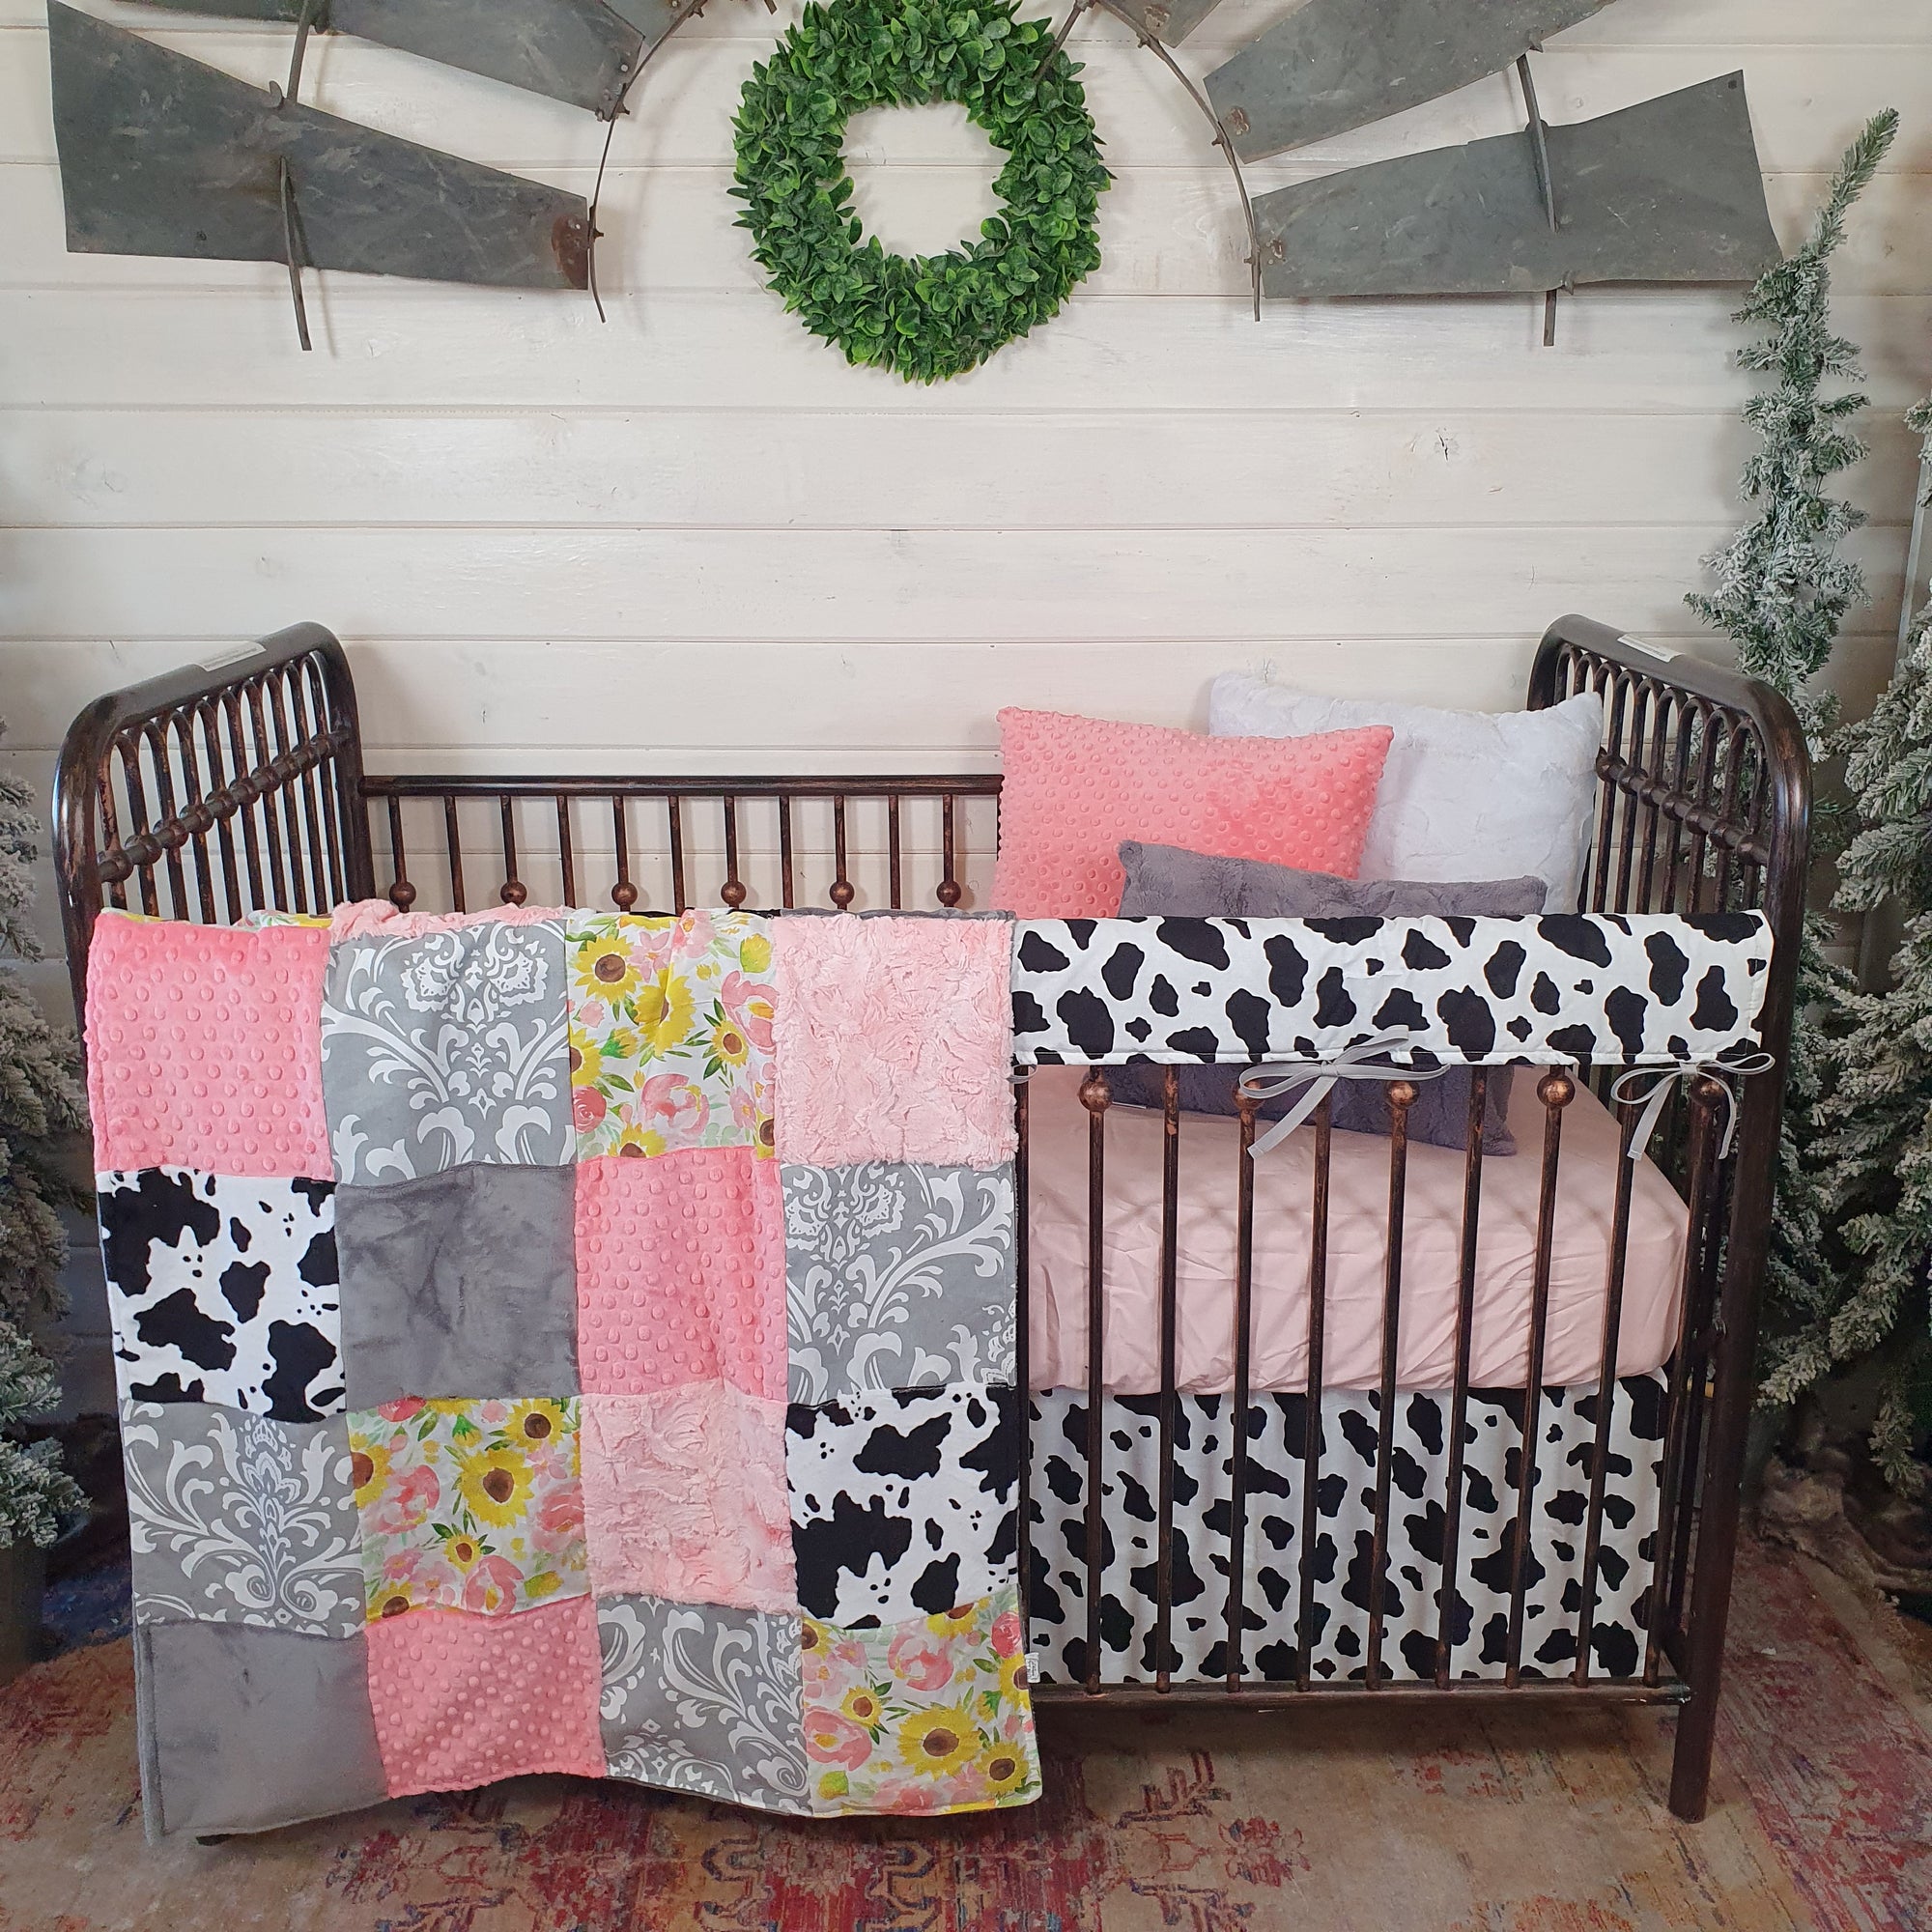 New Release Girl Crib Bedding - Sunflower Rose and Black White Cow Minky Farm Baby Bedding Collection - DBC Baby Bedding Co 